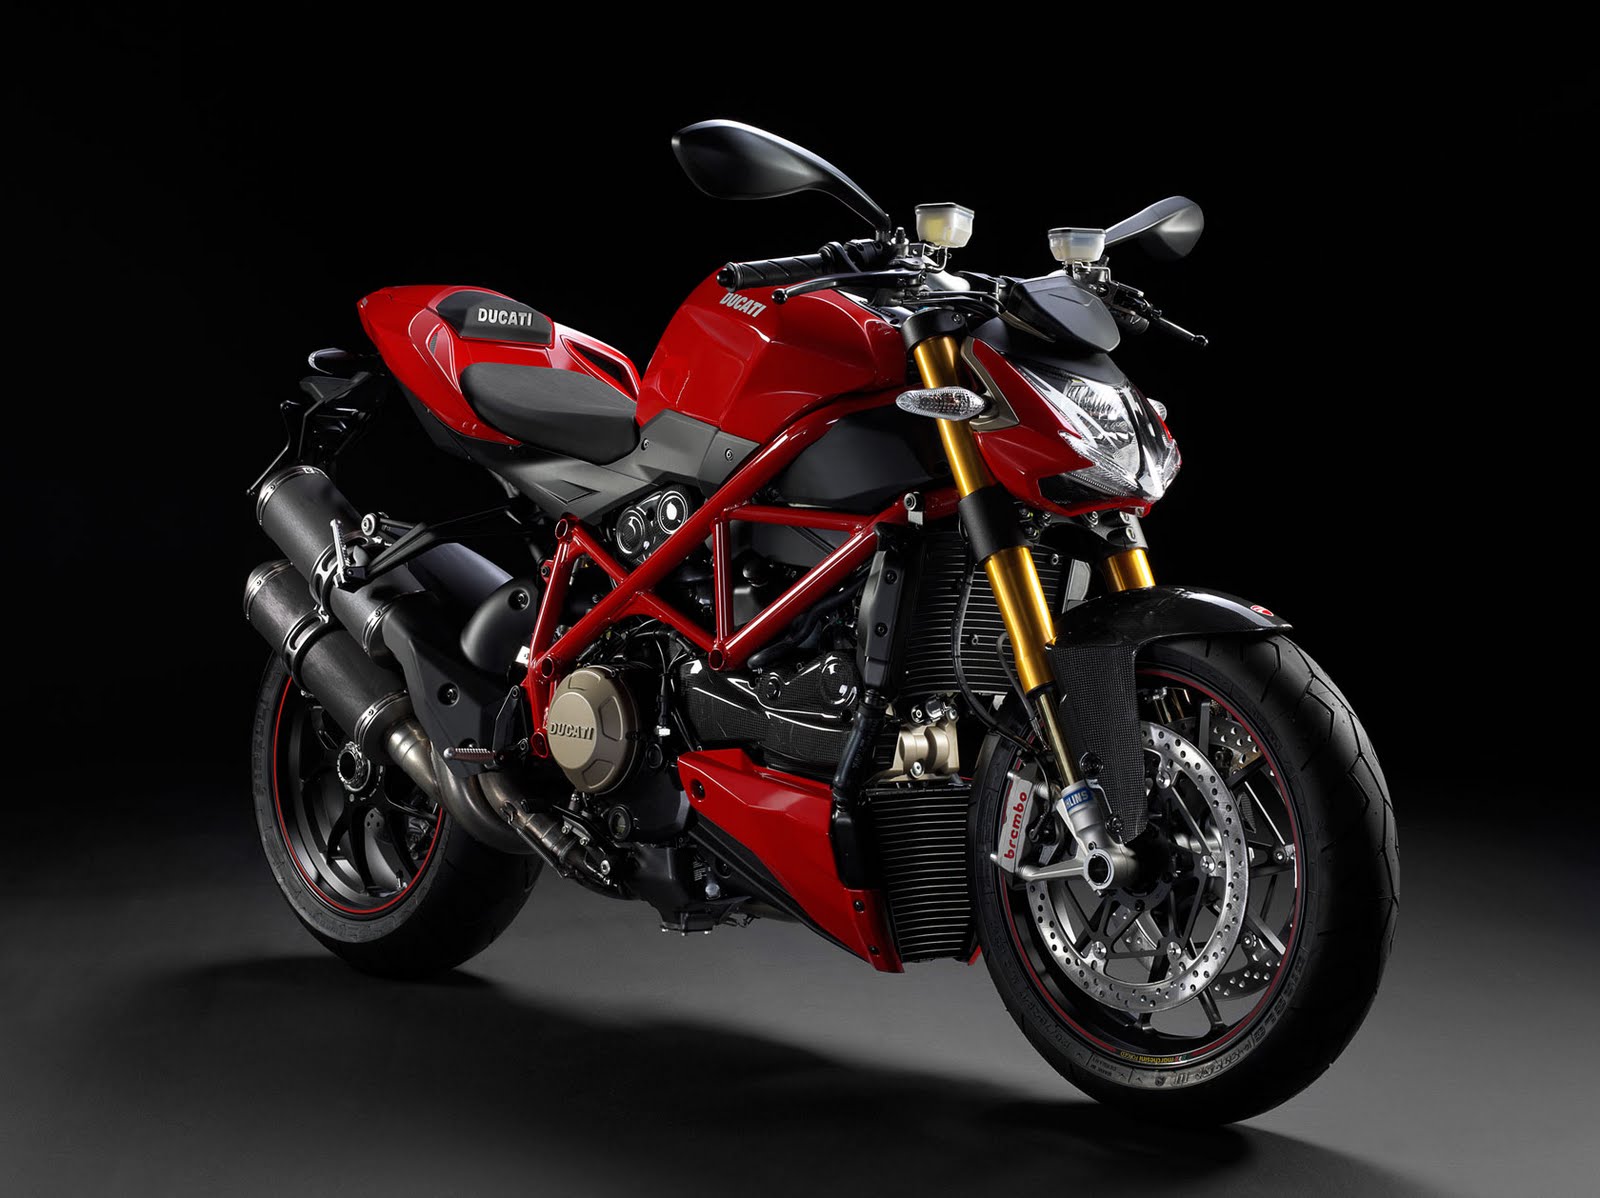 Top Motorcycle Wallpapers 2011 Ducati Streetfighter S Motorcycle 1600x1198